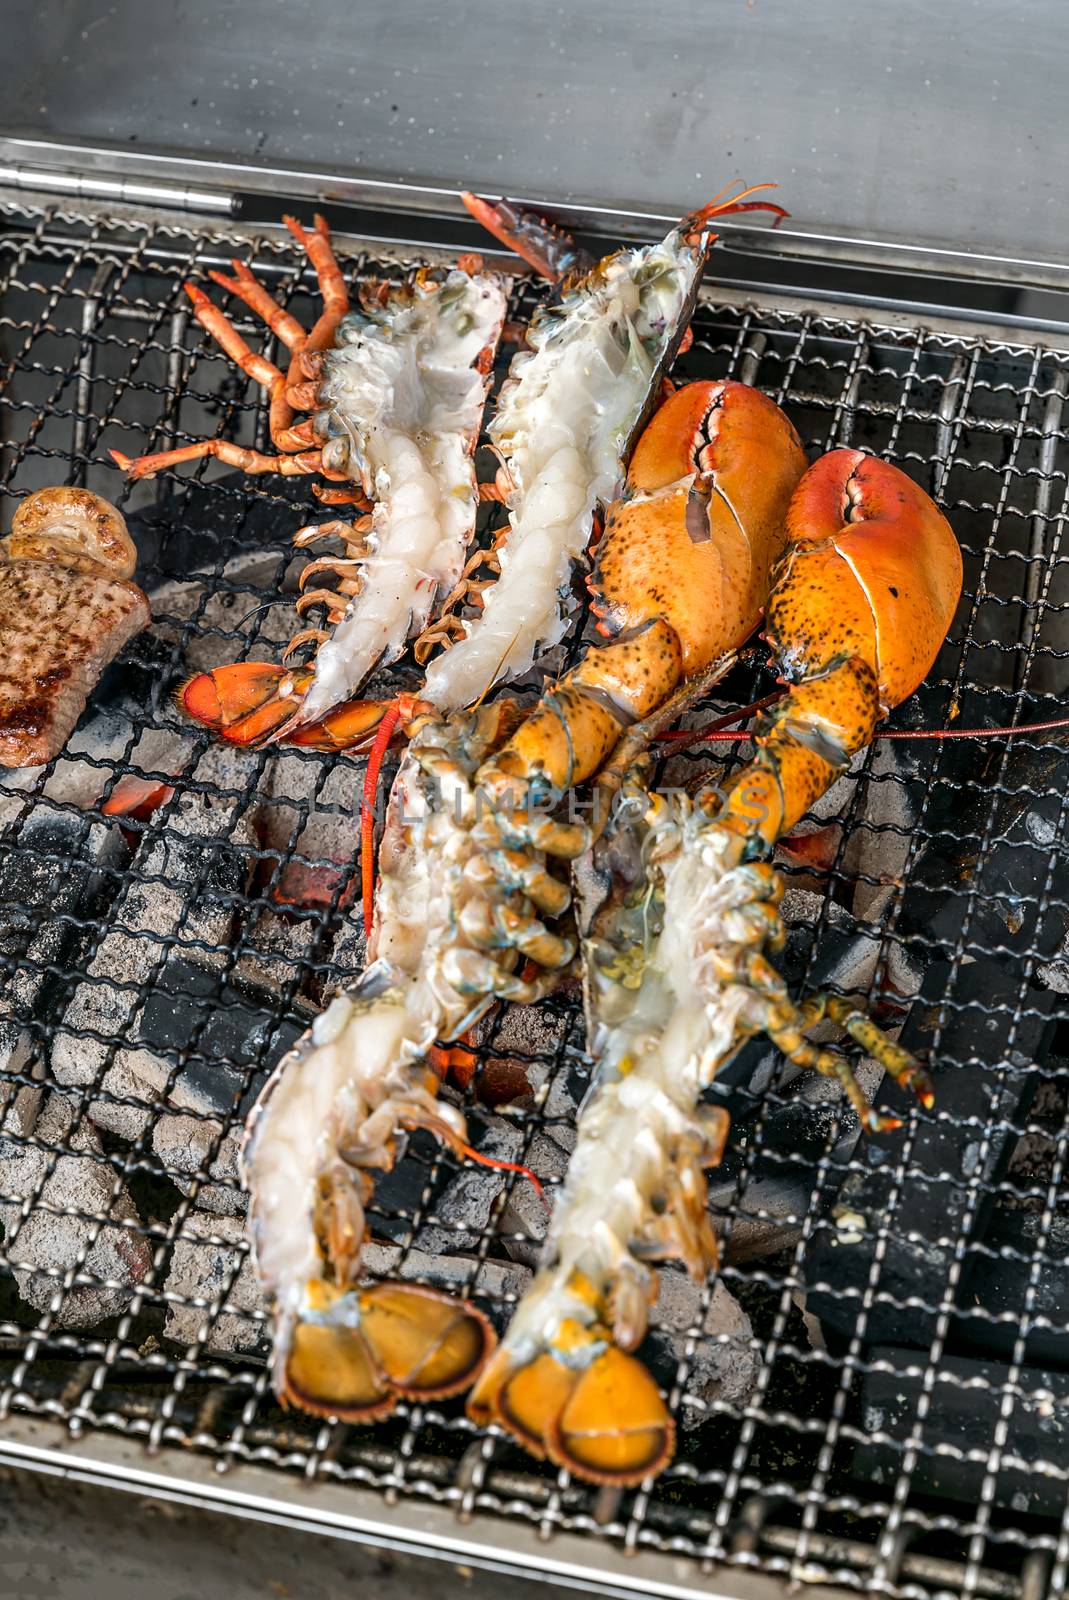 Lobster on the charcoal grill